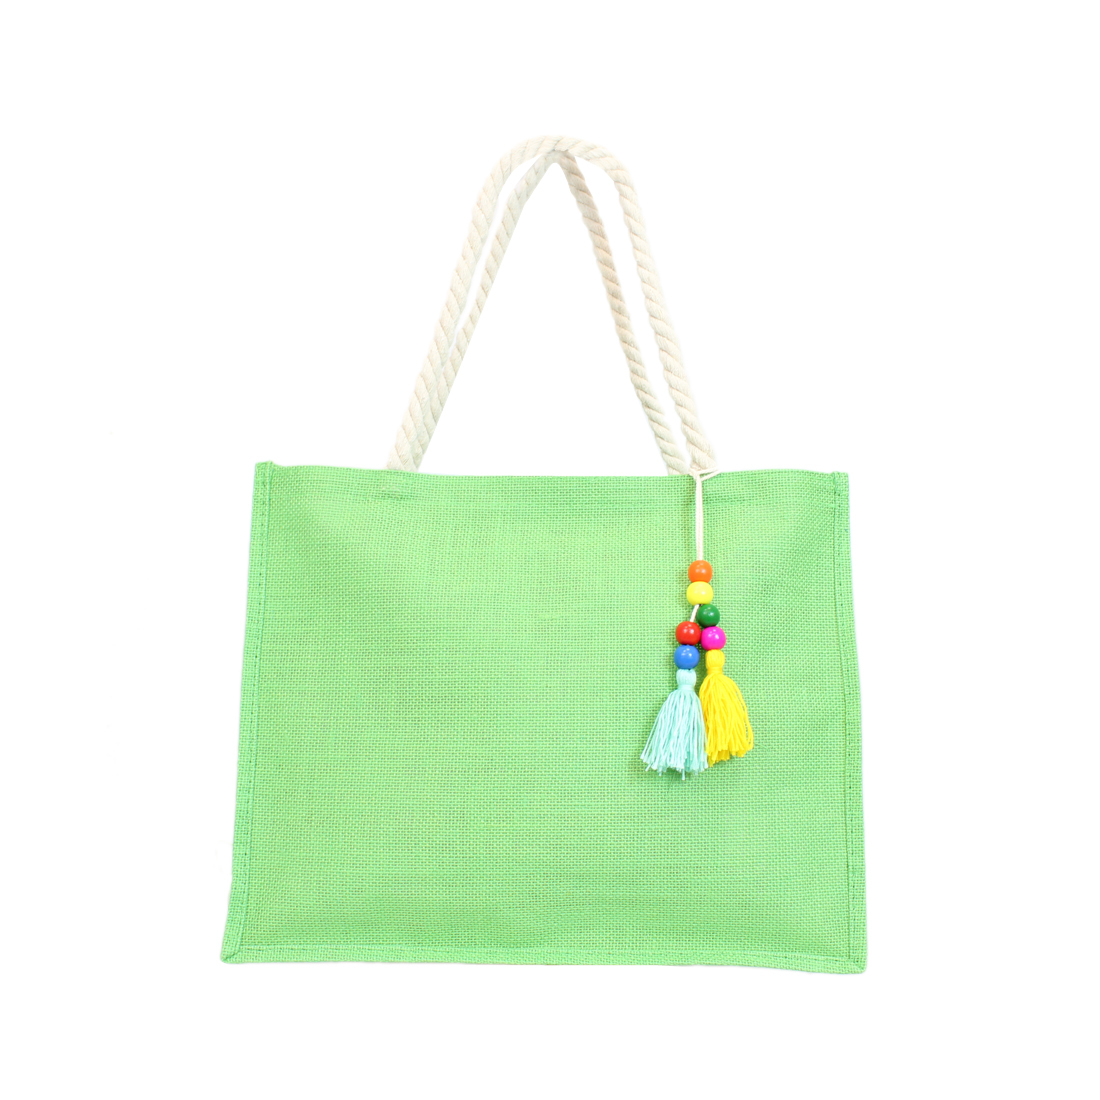 Rectangular with two straw straps and colorful hanging decoration